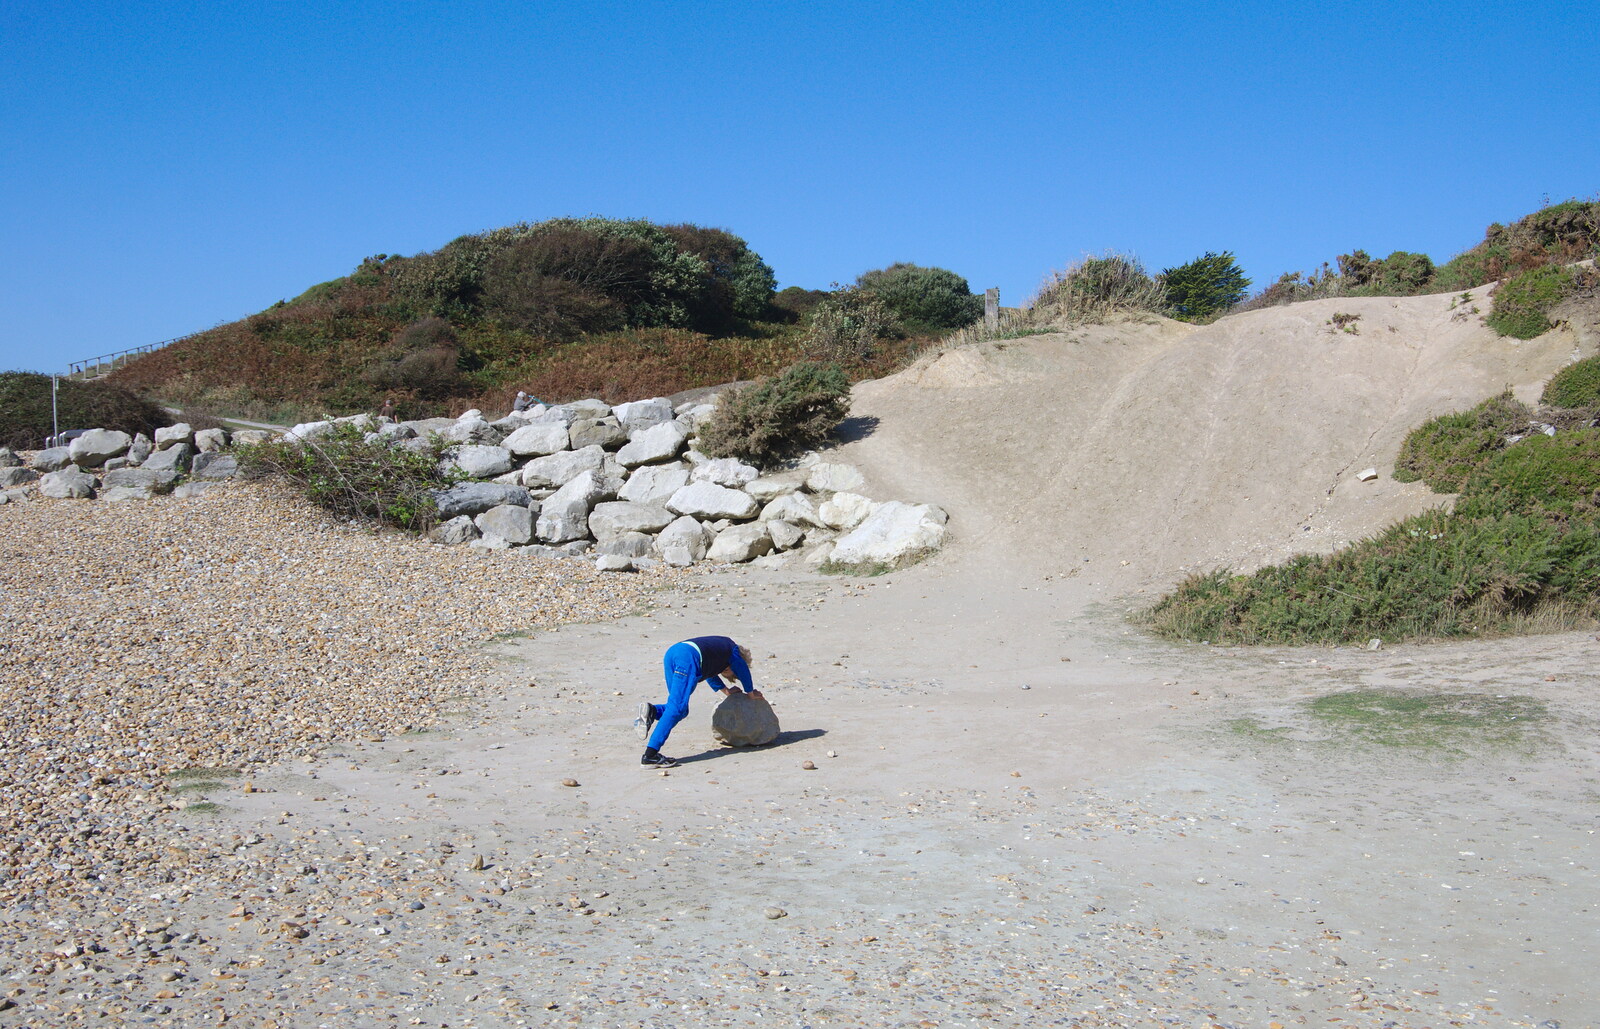 Harry tries to roll a boulder around the beach from A Trip to the South Coast, Highcliffe, Dorset - 20th September 2019